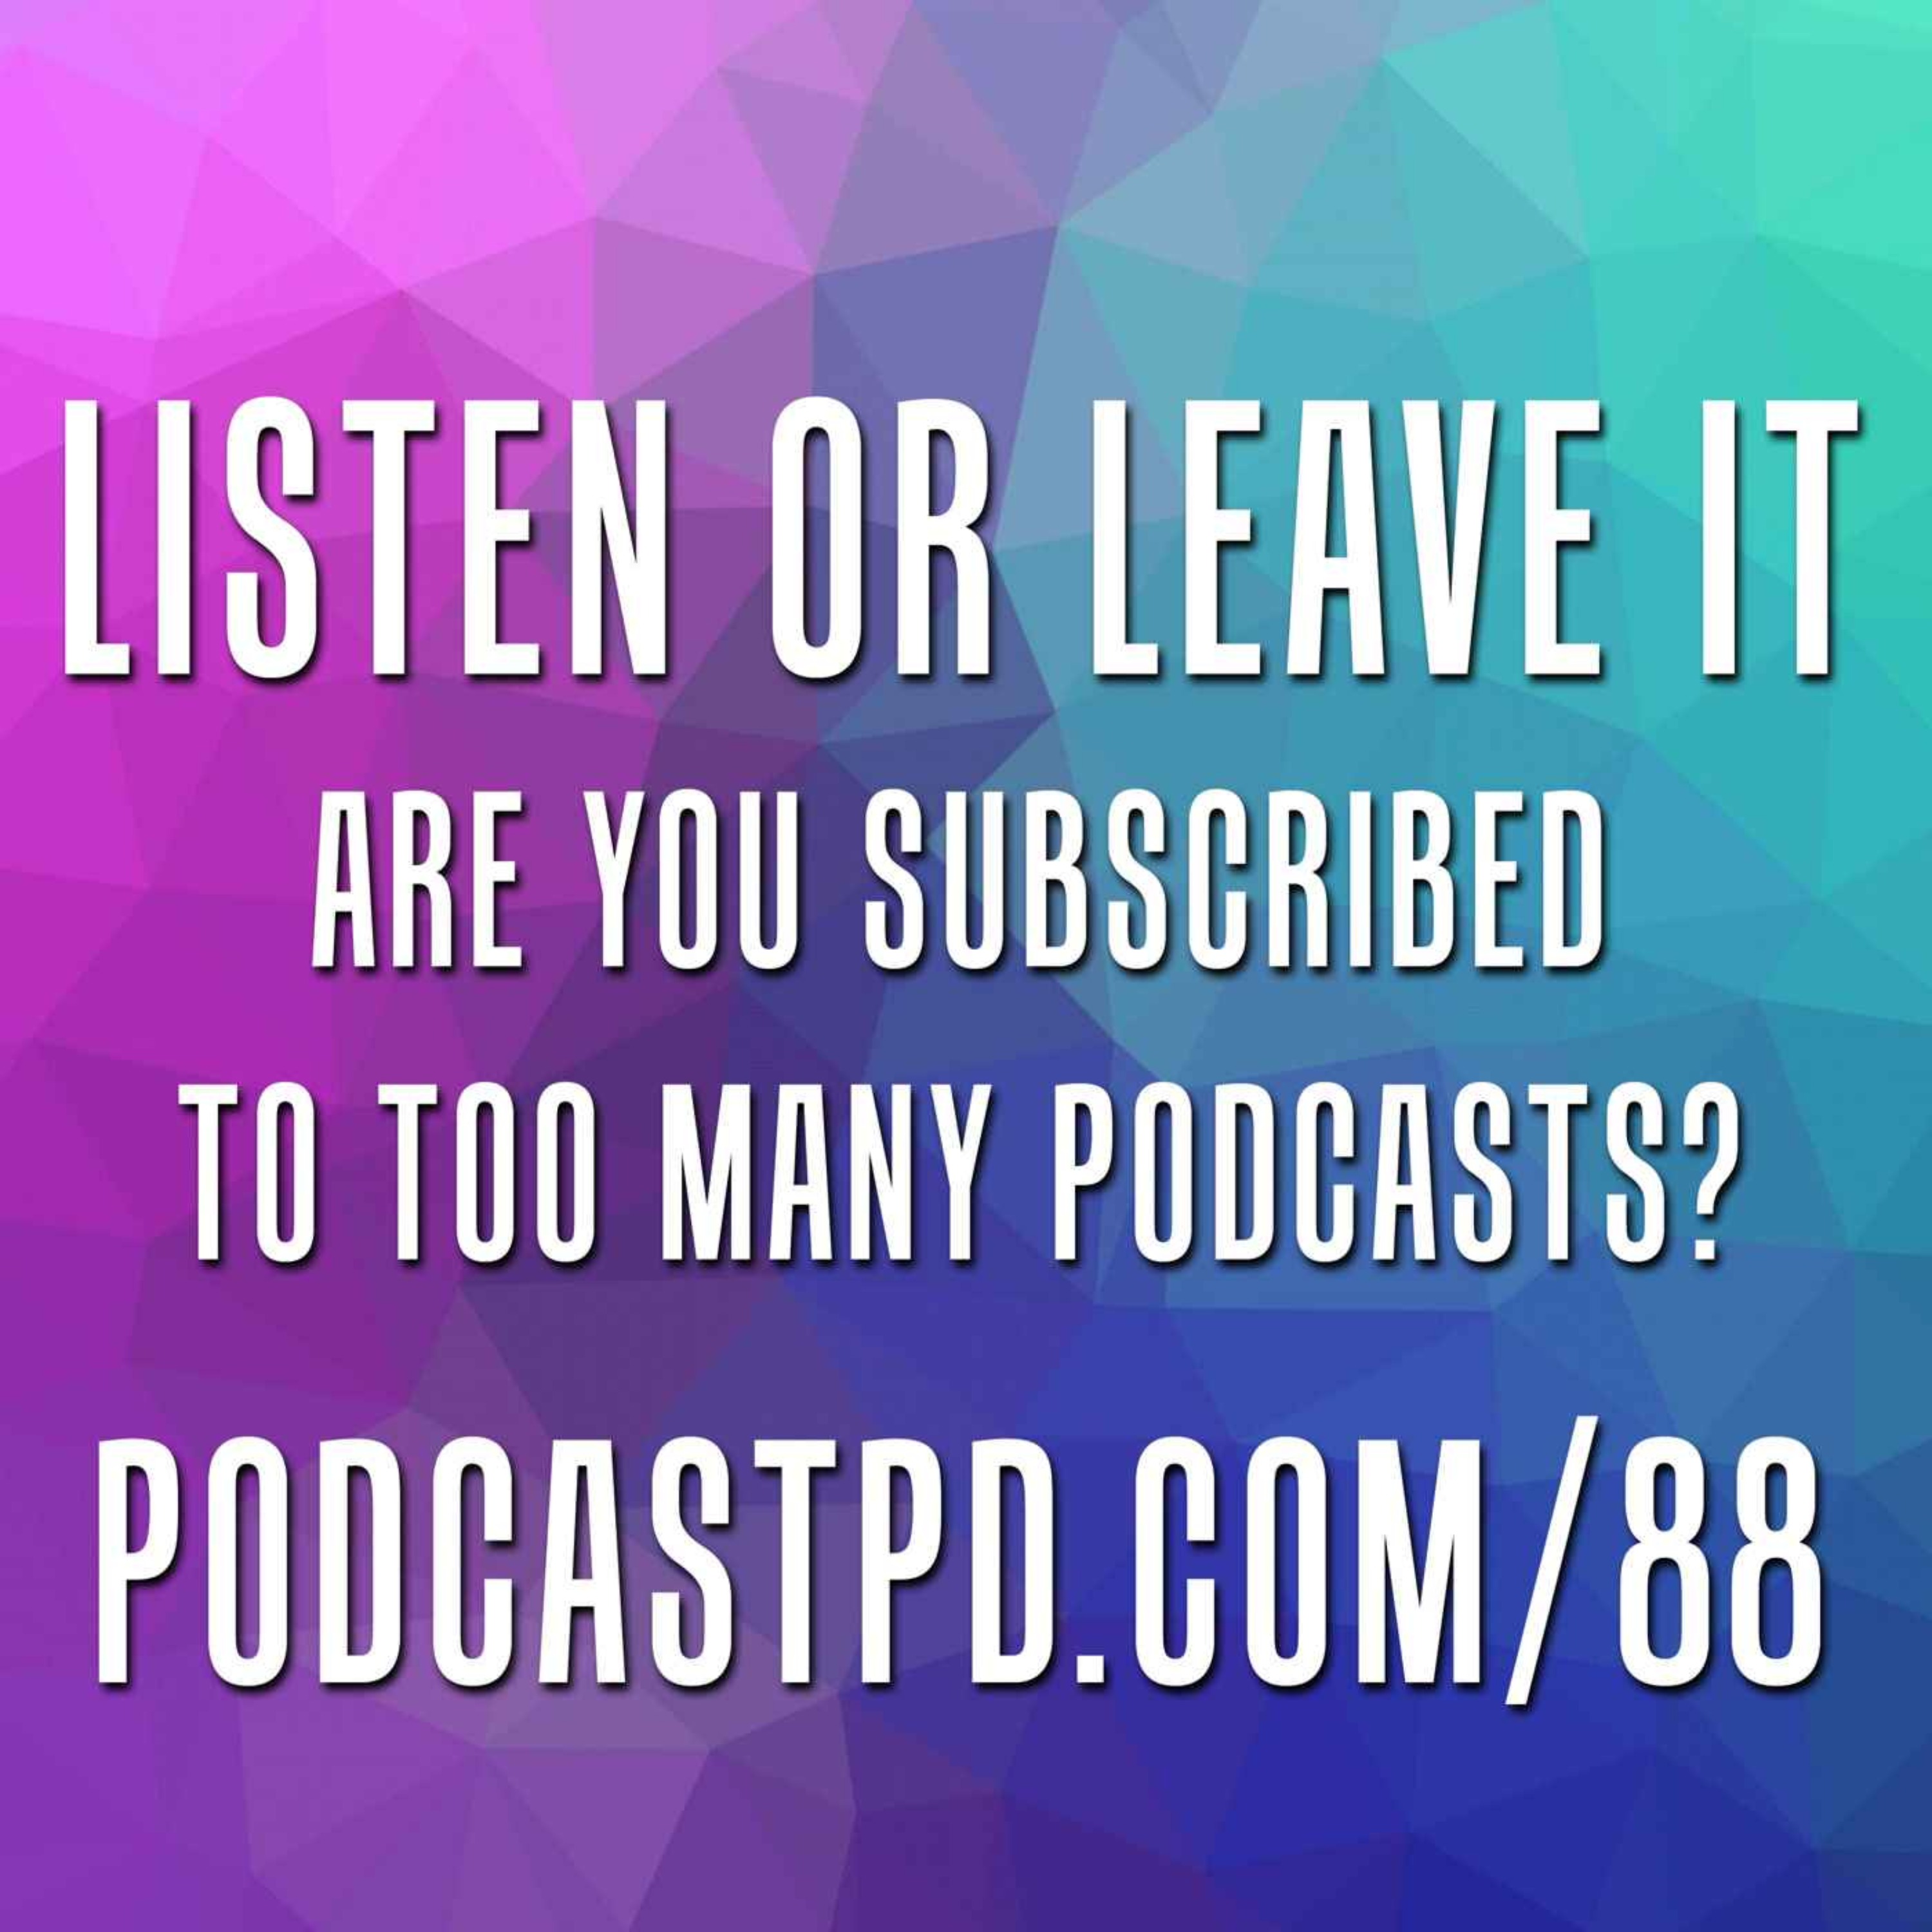 Podcasts: Listen or Leave Them - PPD088 Image